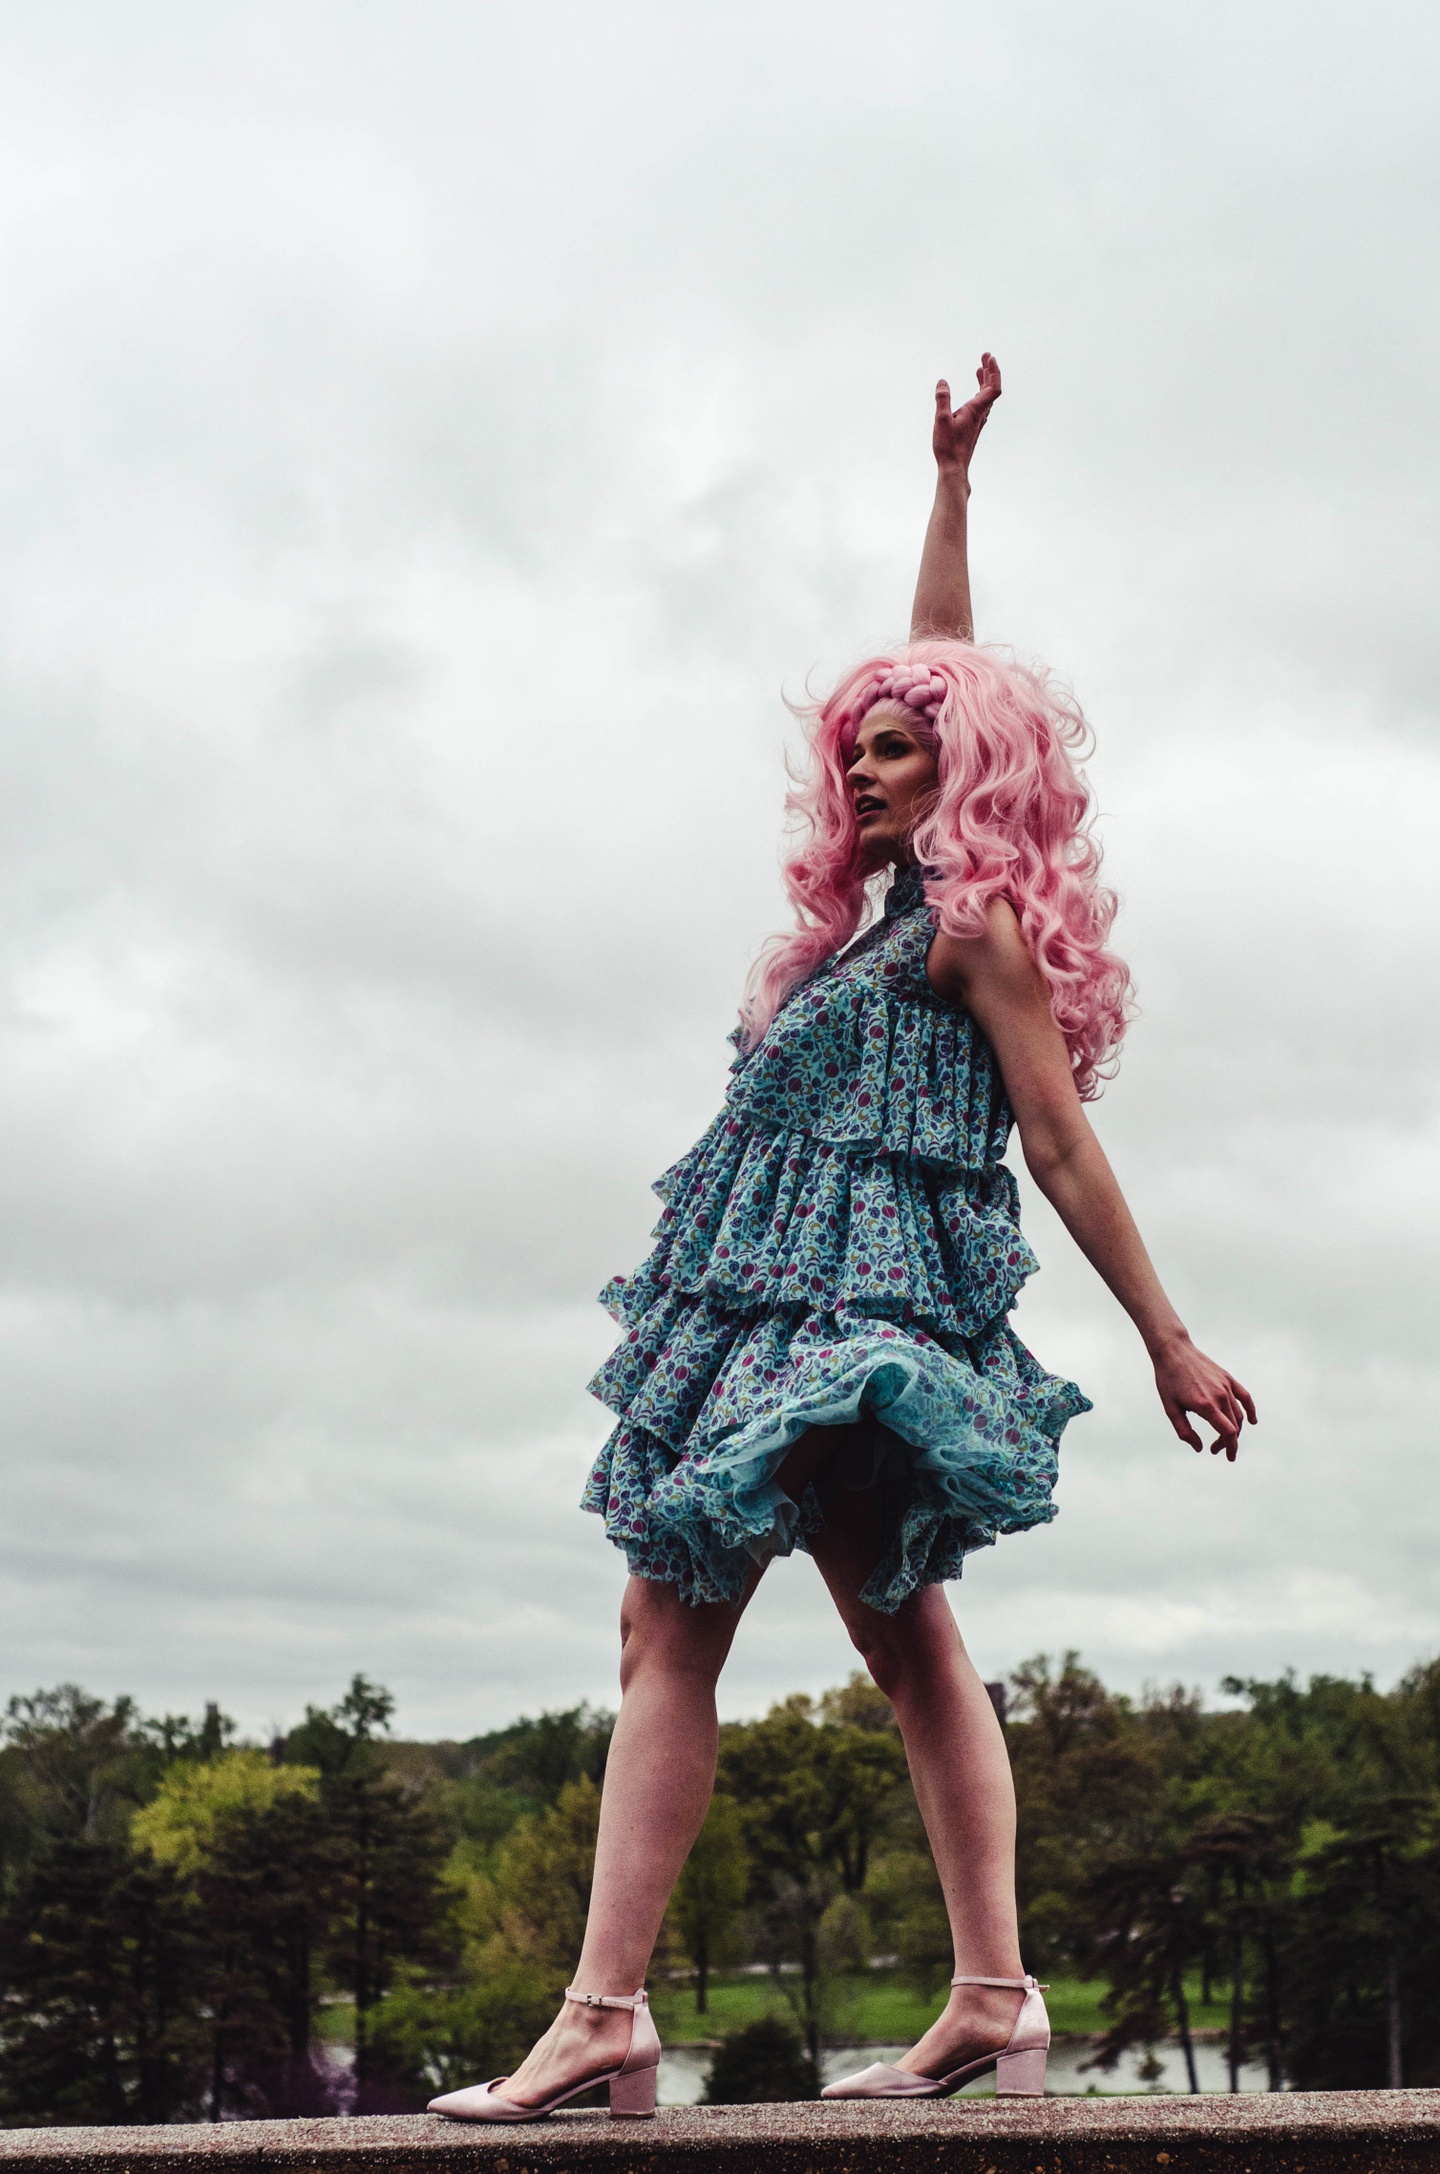 Model in a curly pink wig wears a kneelength sleeveless dress with four tiers of ruffles, made of a pale blue fabric printed with a colorful repeating planet icon pattern.